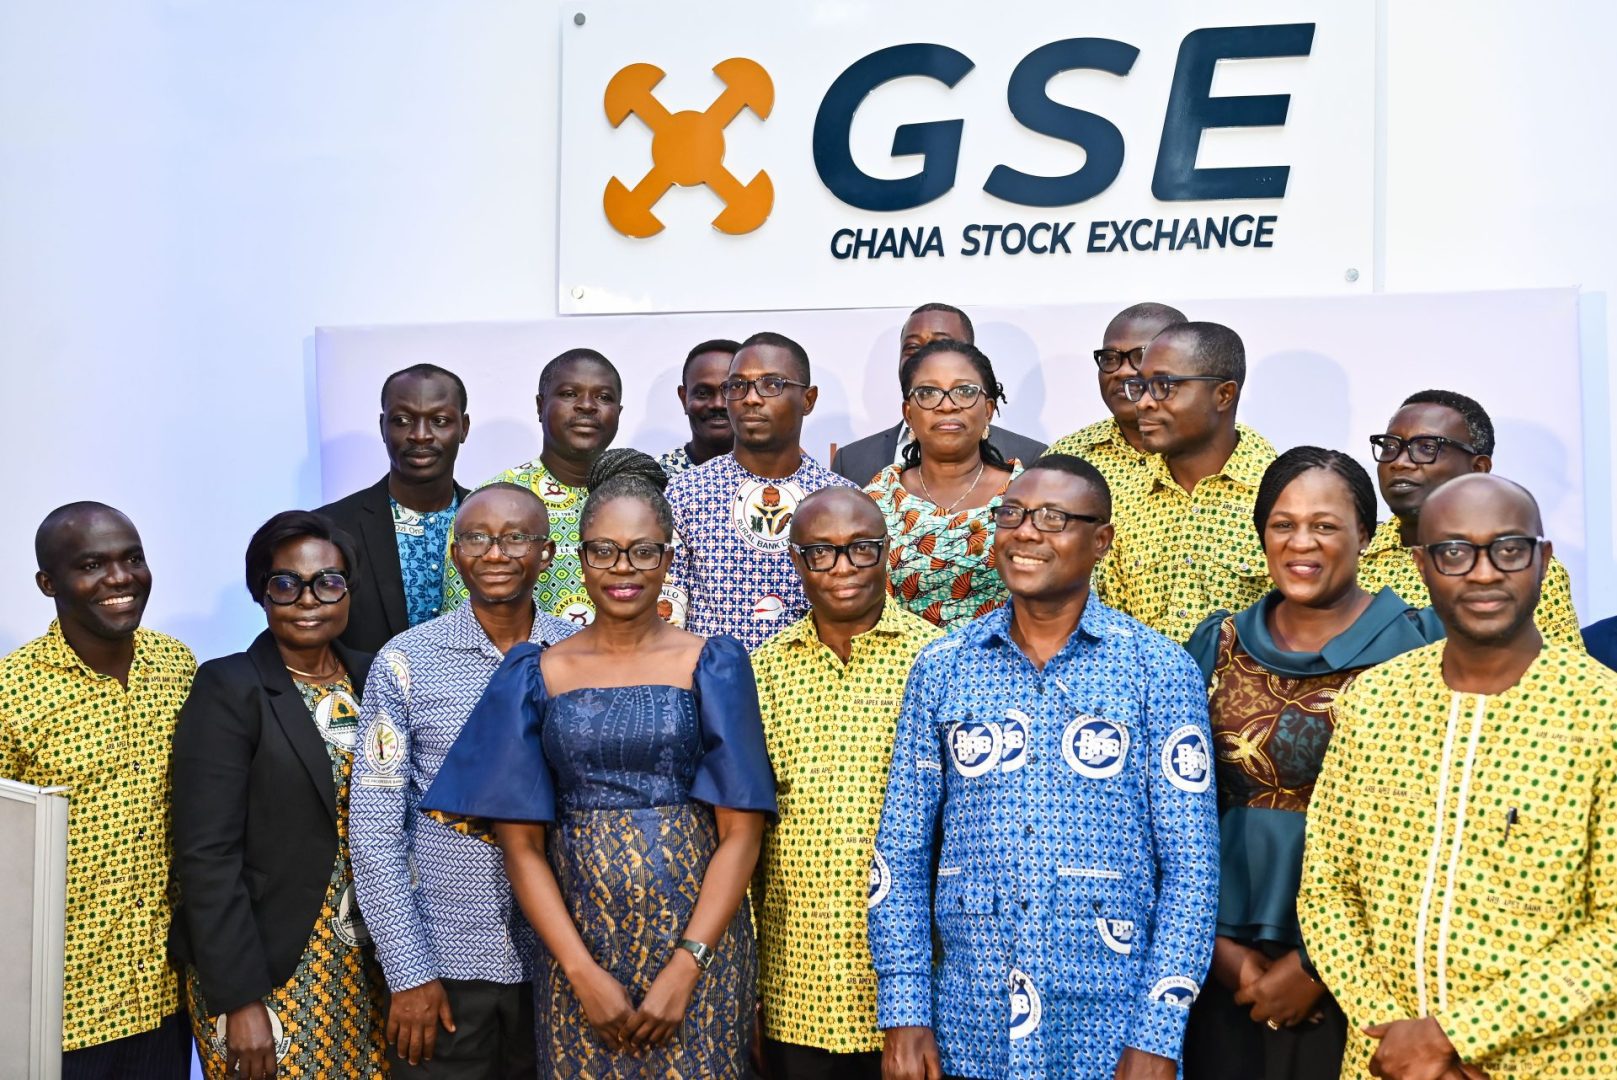 GSE Launches the First Regulated Over-the-Counter (OTC) Market in Ghana, Ghana Stock Exchange